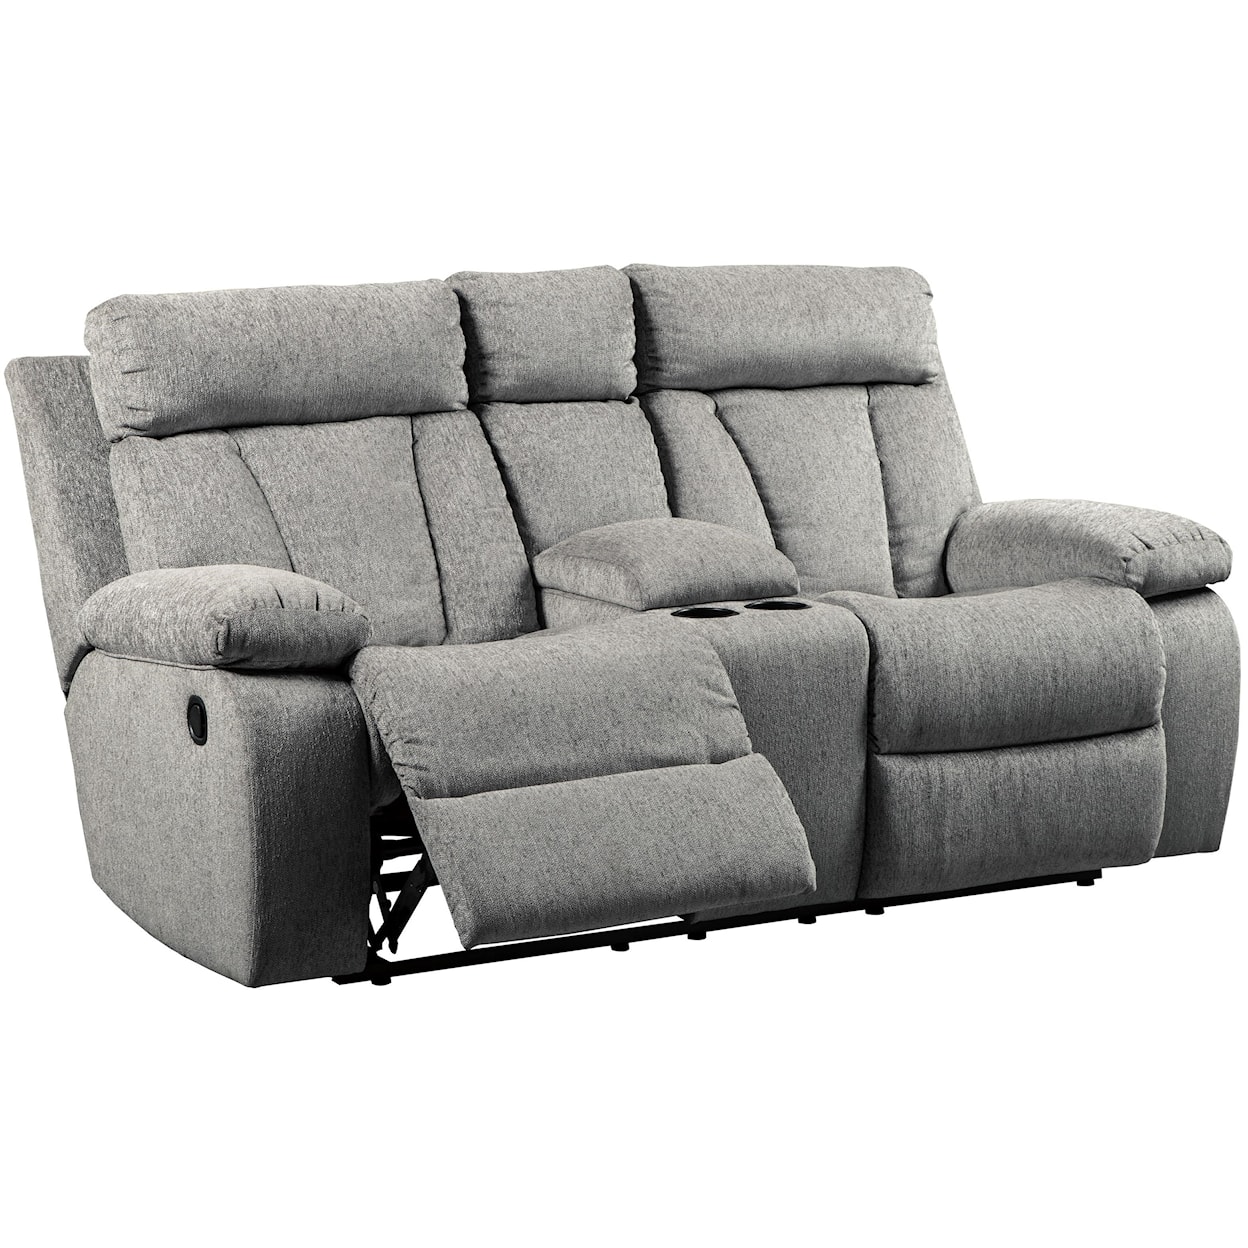 Michael Alan Select Mitchiner Double Reclining Love Seat